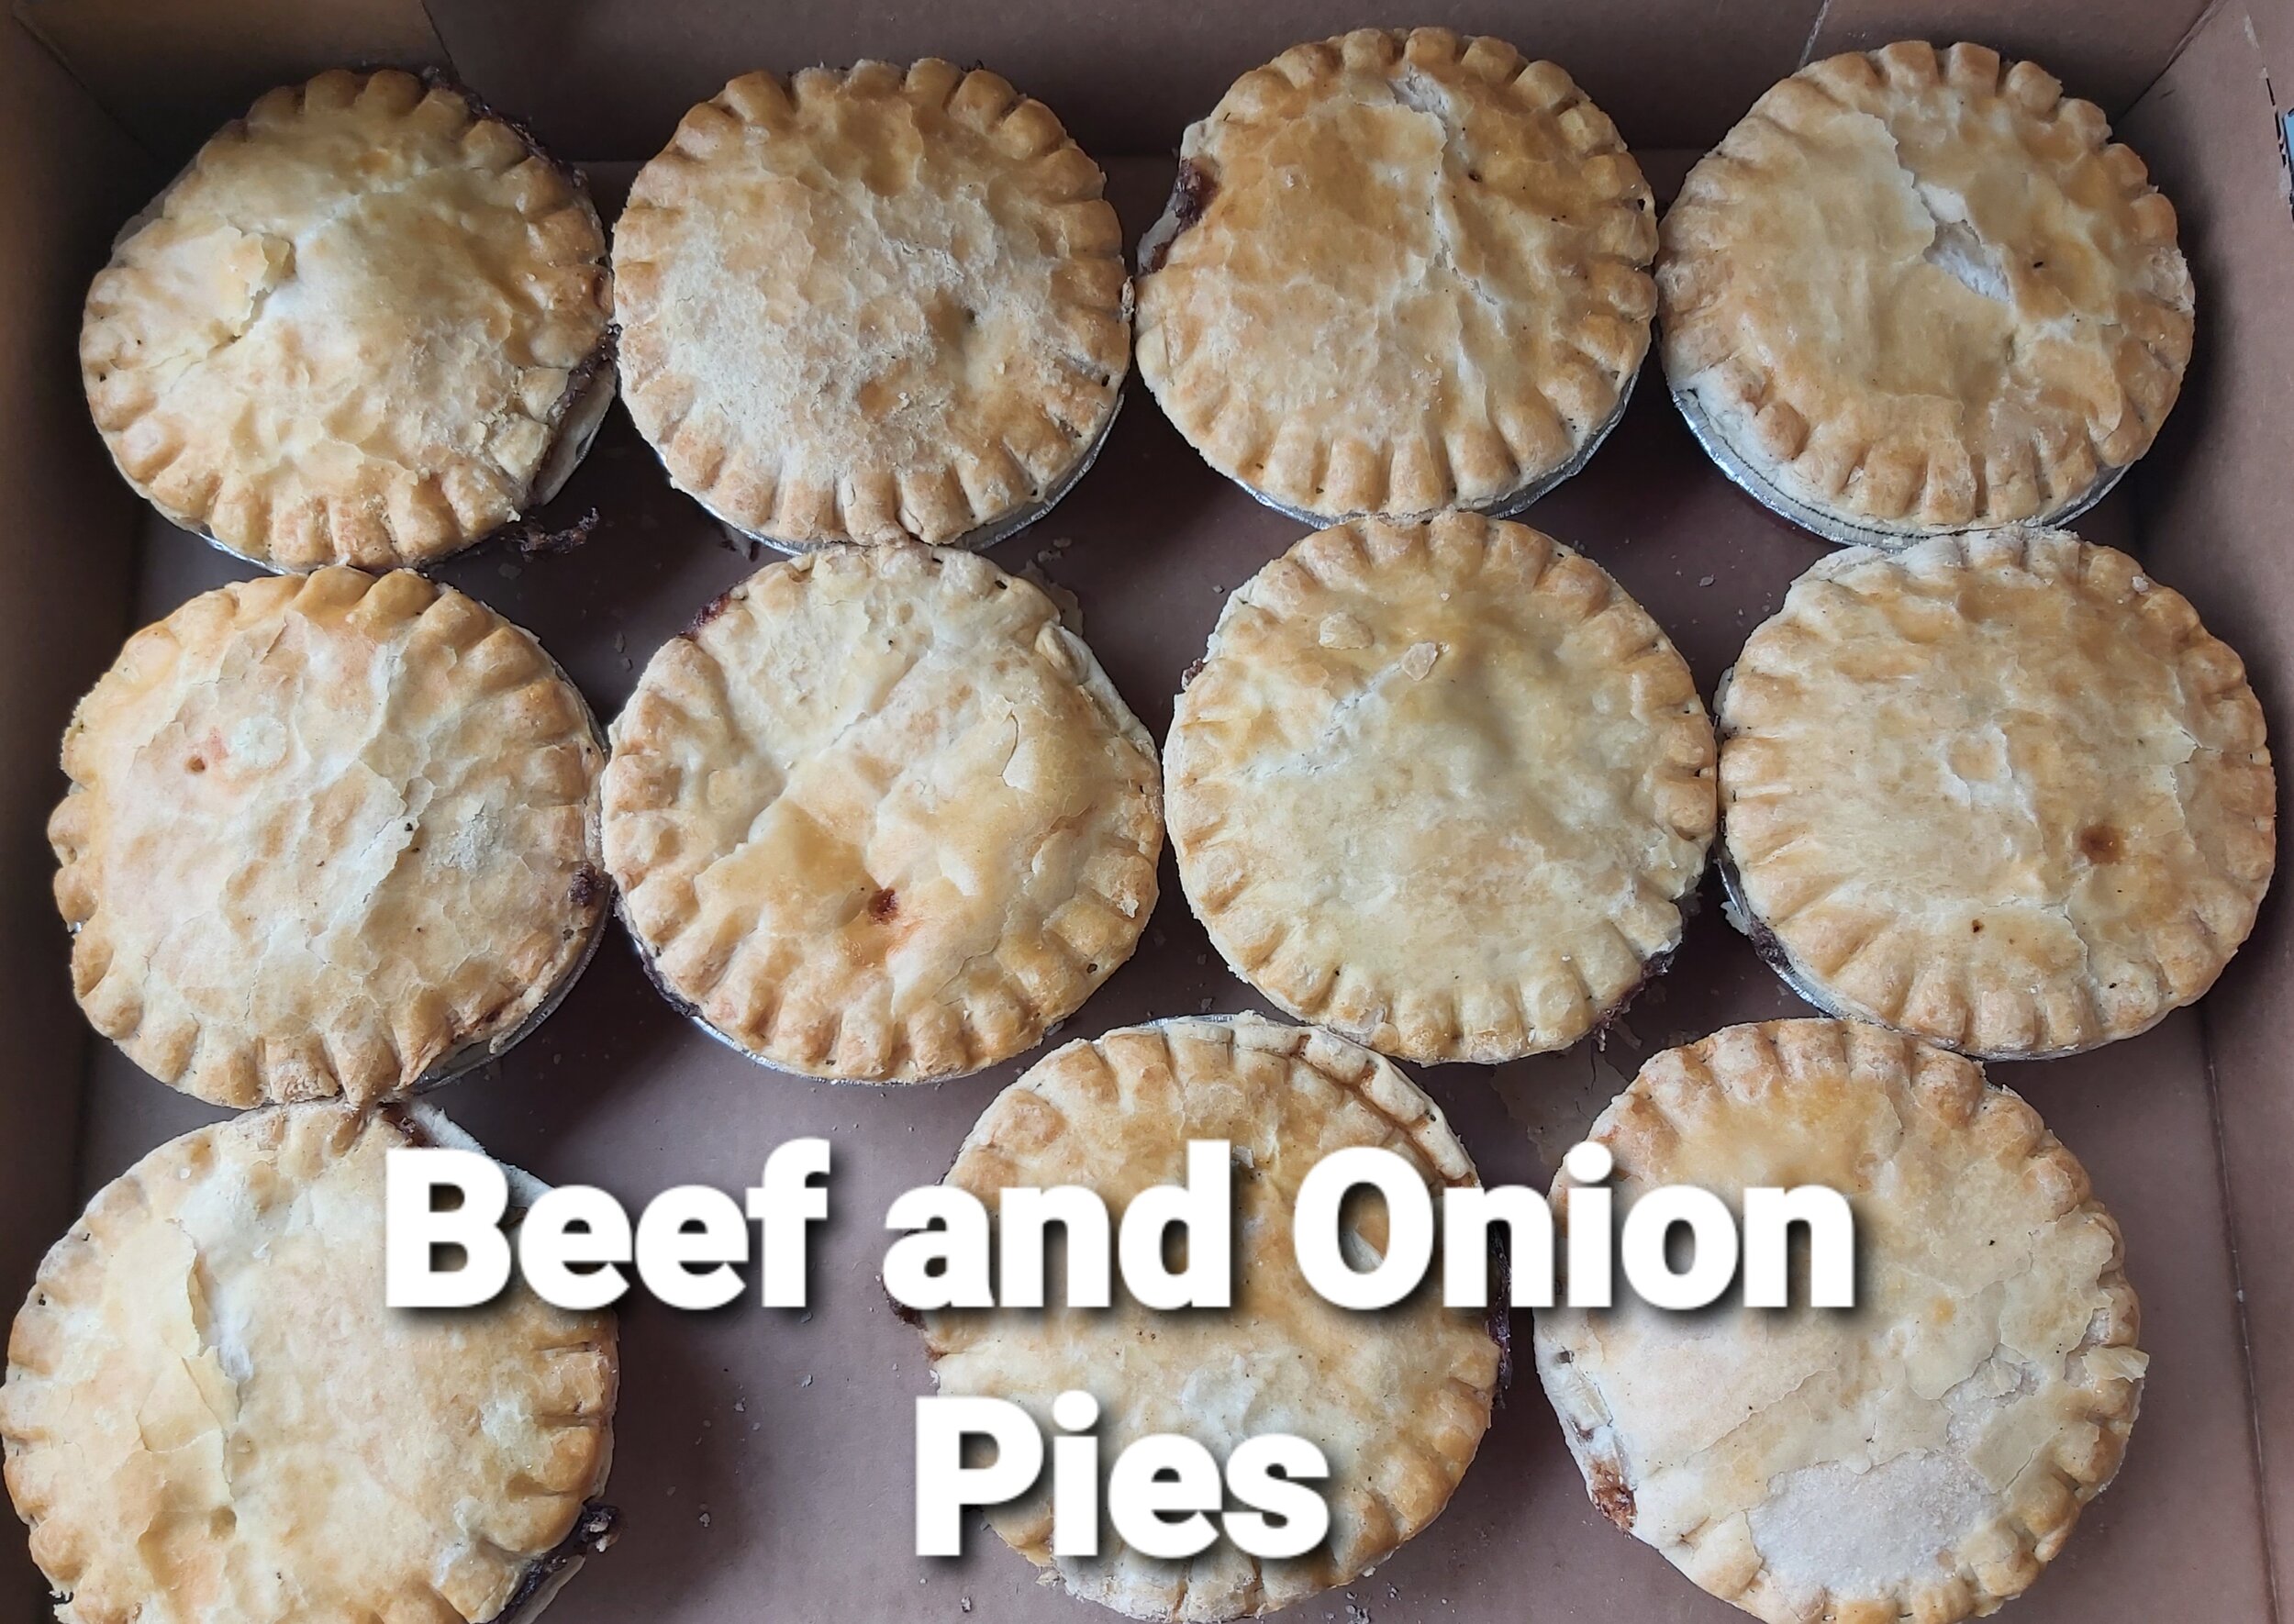 Beef and Onion Pies.jpg